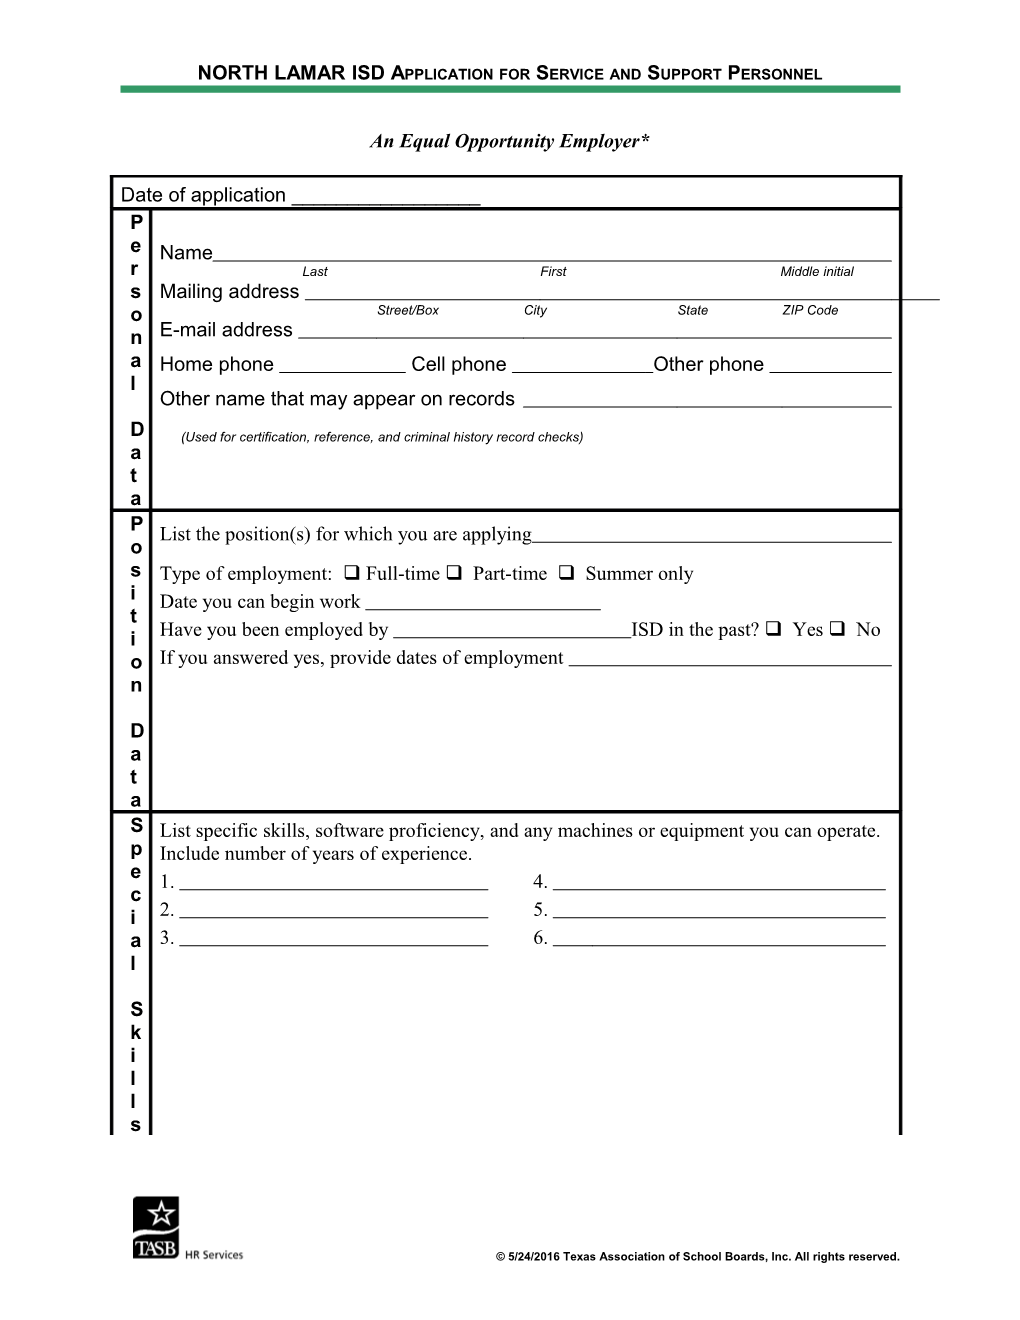 Sample Application for Service and Support Personnel